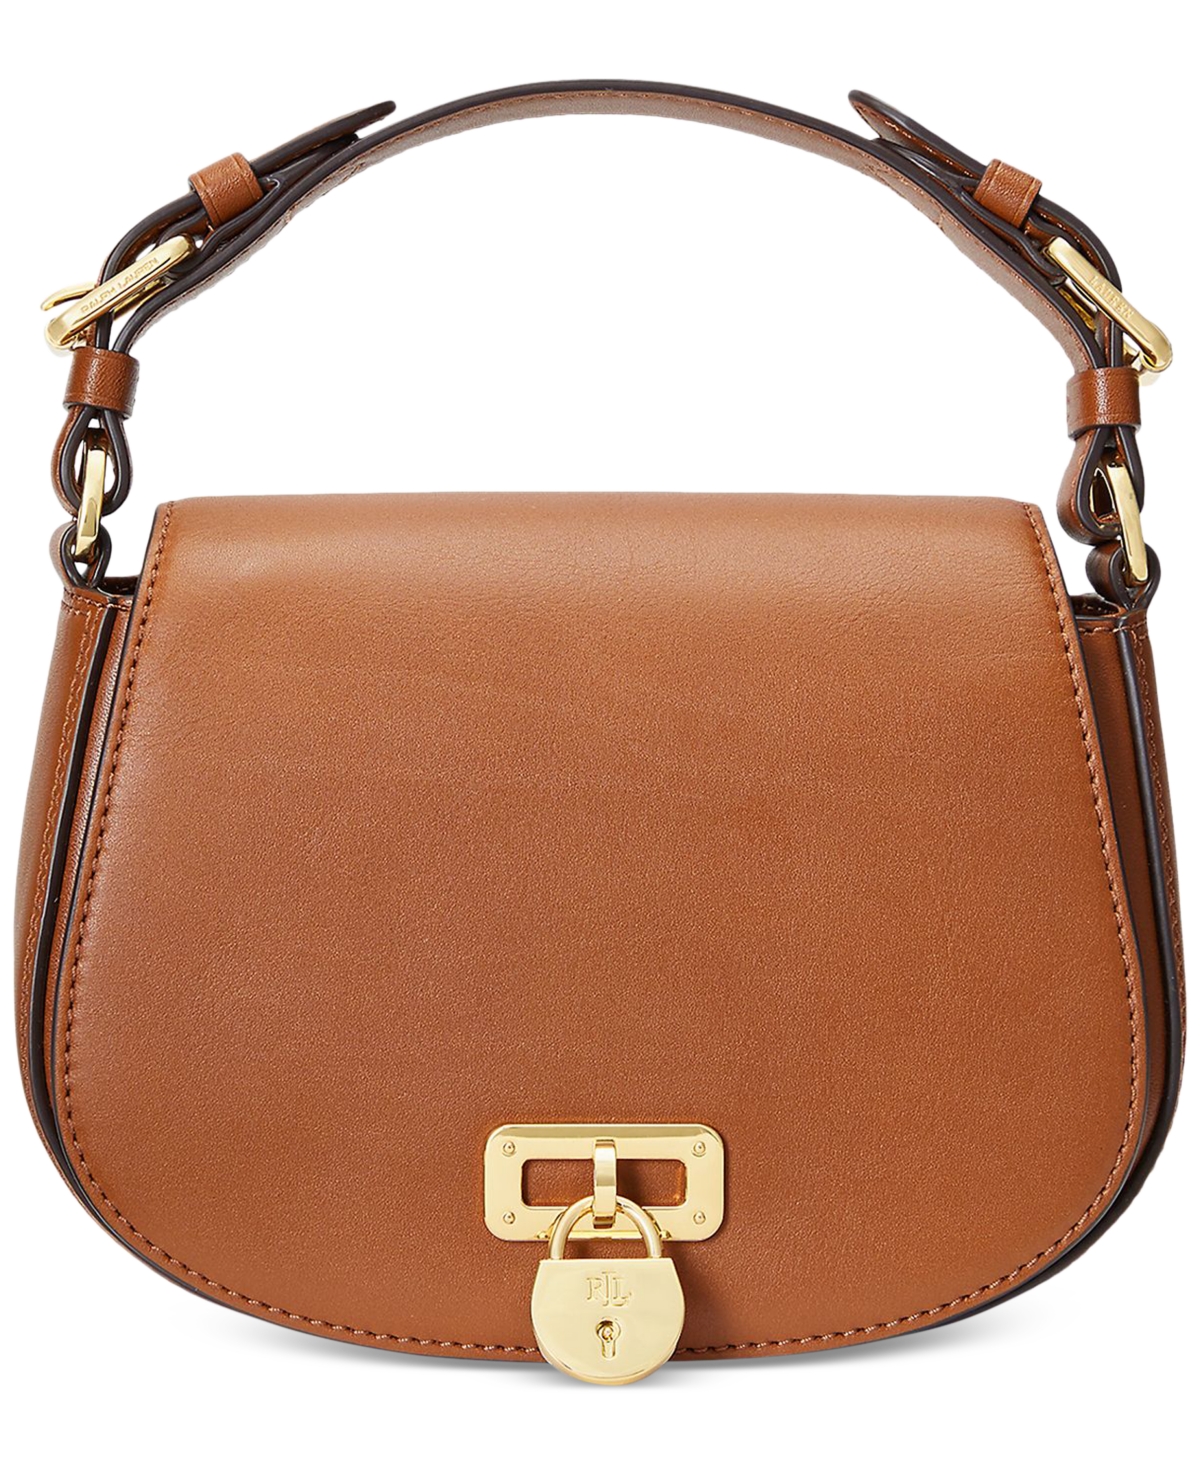 FOXLOVER Genuine Leather Small Crossbody Bags Purses India